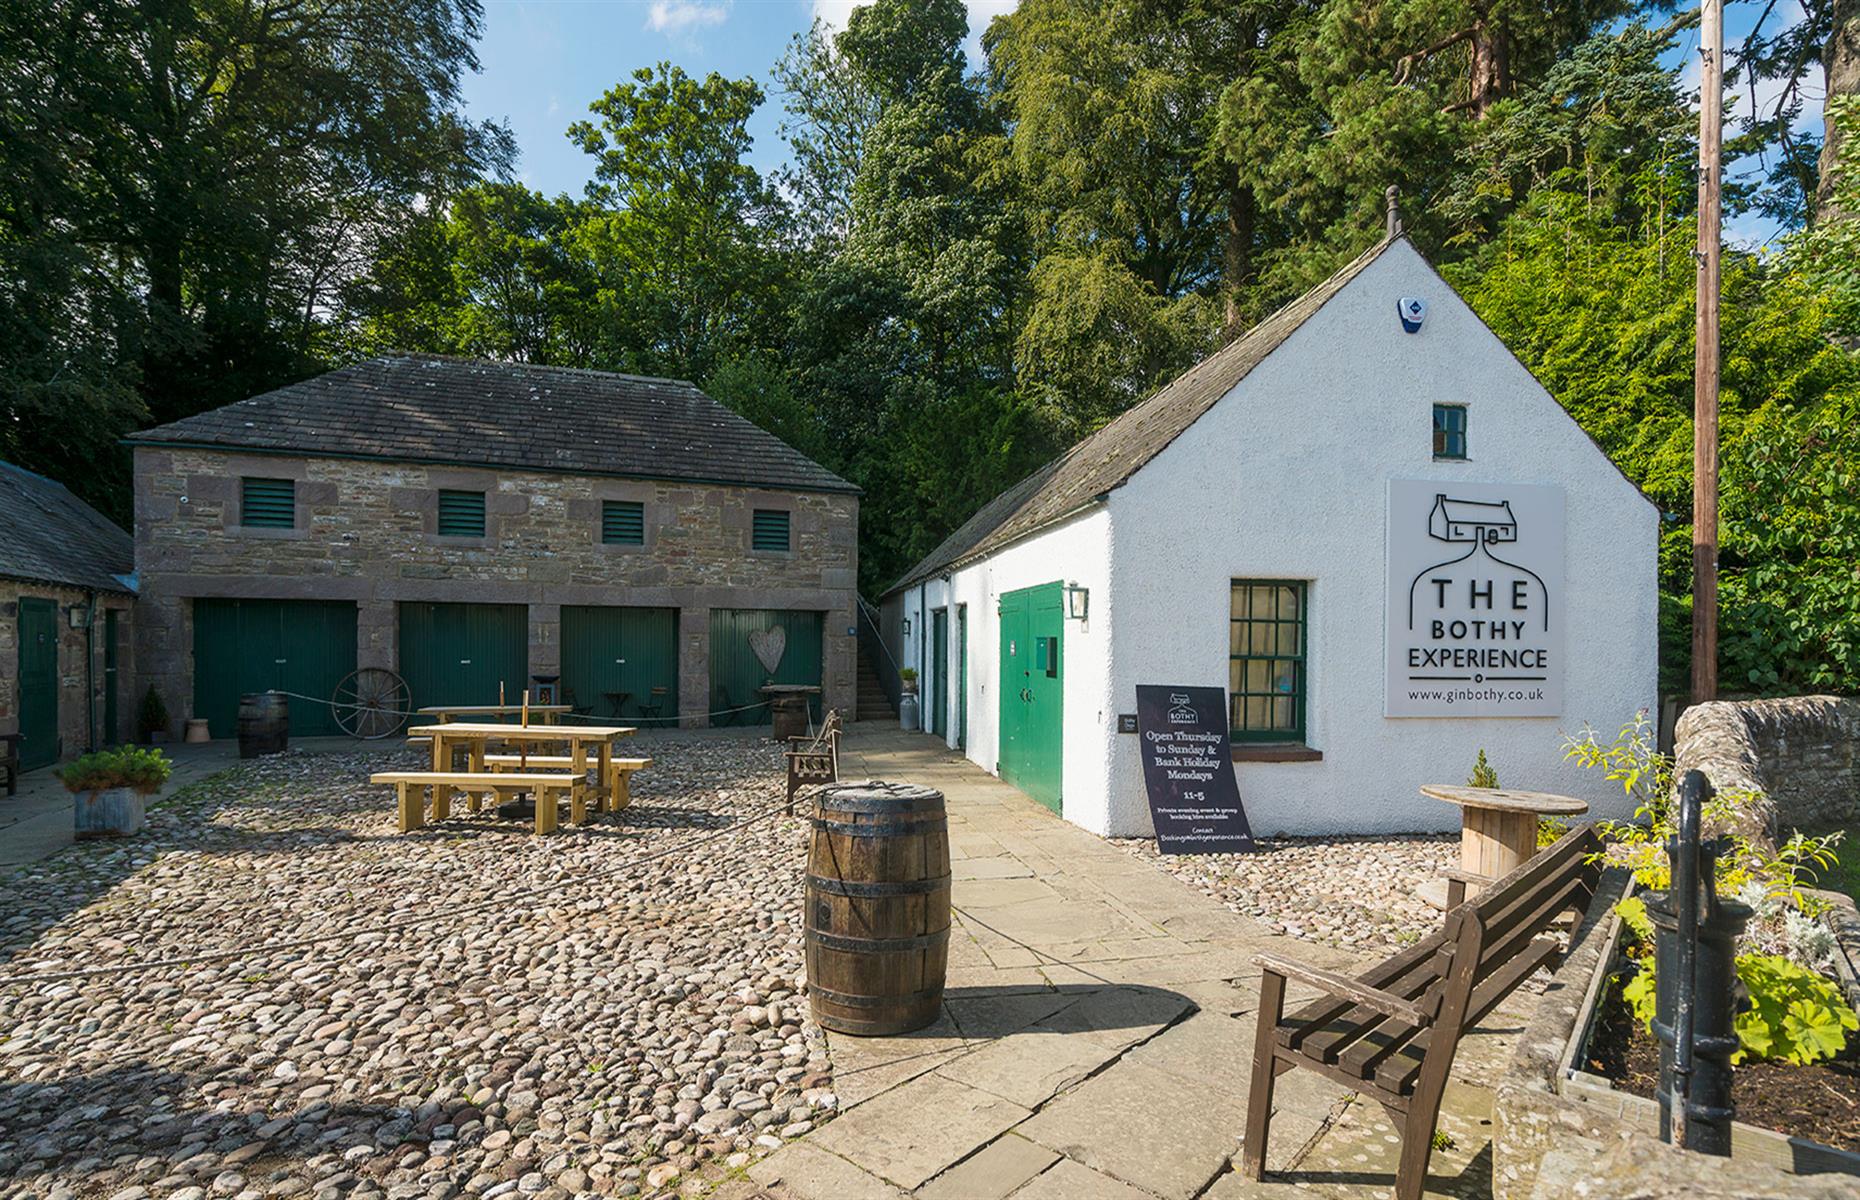 As well as the lavish interiors of the castle itself, the Gin Bothy at Glamis, located just a few minutes from the castle, offers an altogether different Scottish experience. With gin tastings, music, stories and a fully-stocked Scottish larder, it's a great place to refuel after a day of castle exploring.